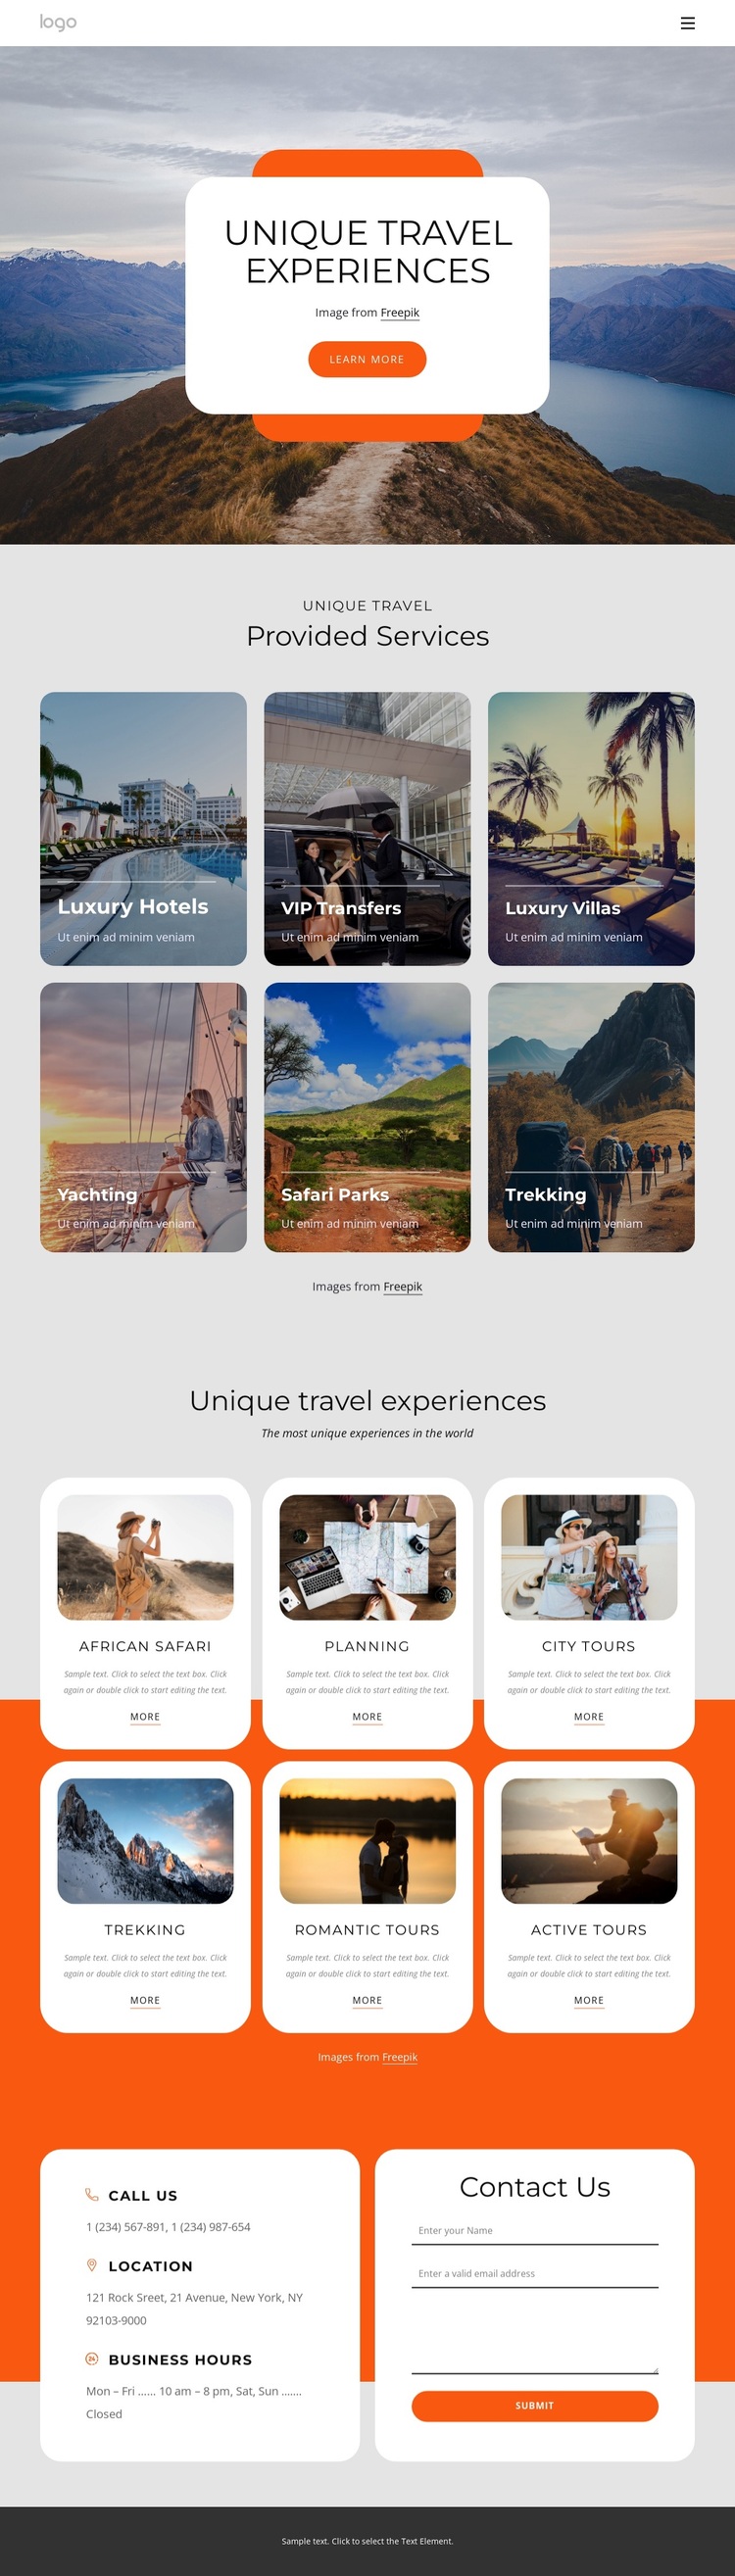 Luxury small-group travel experience Template